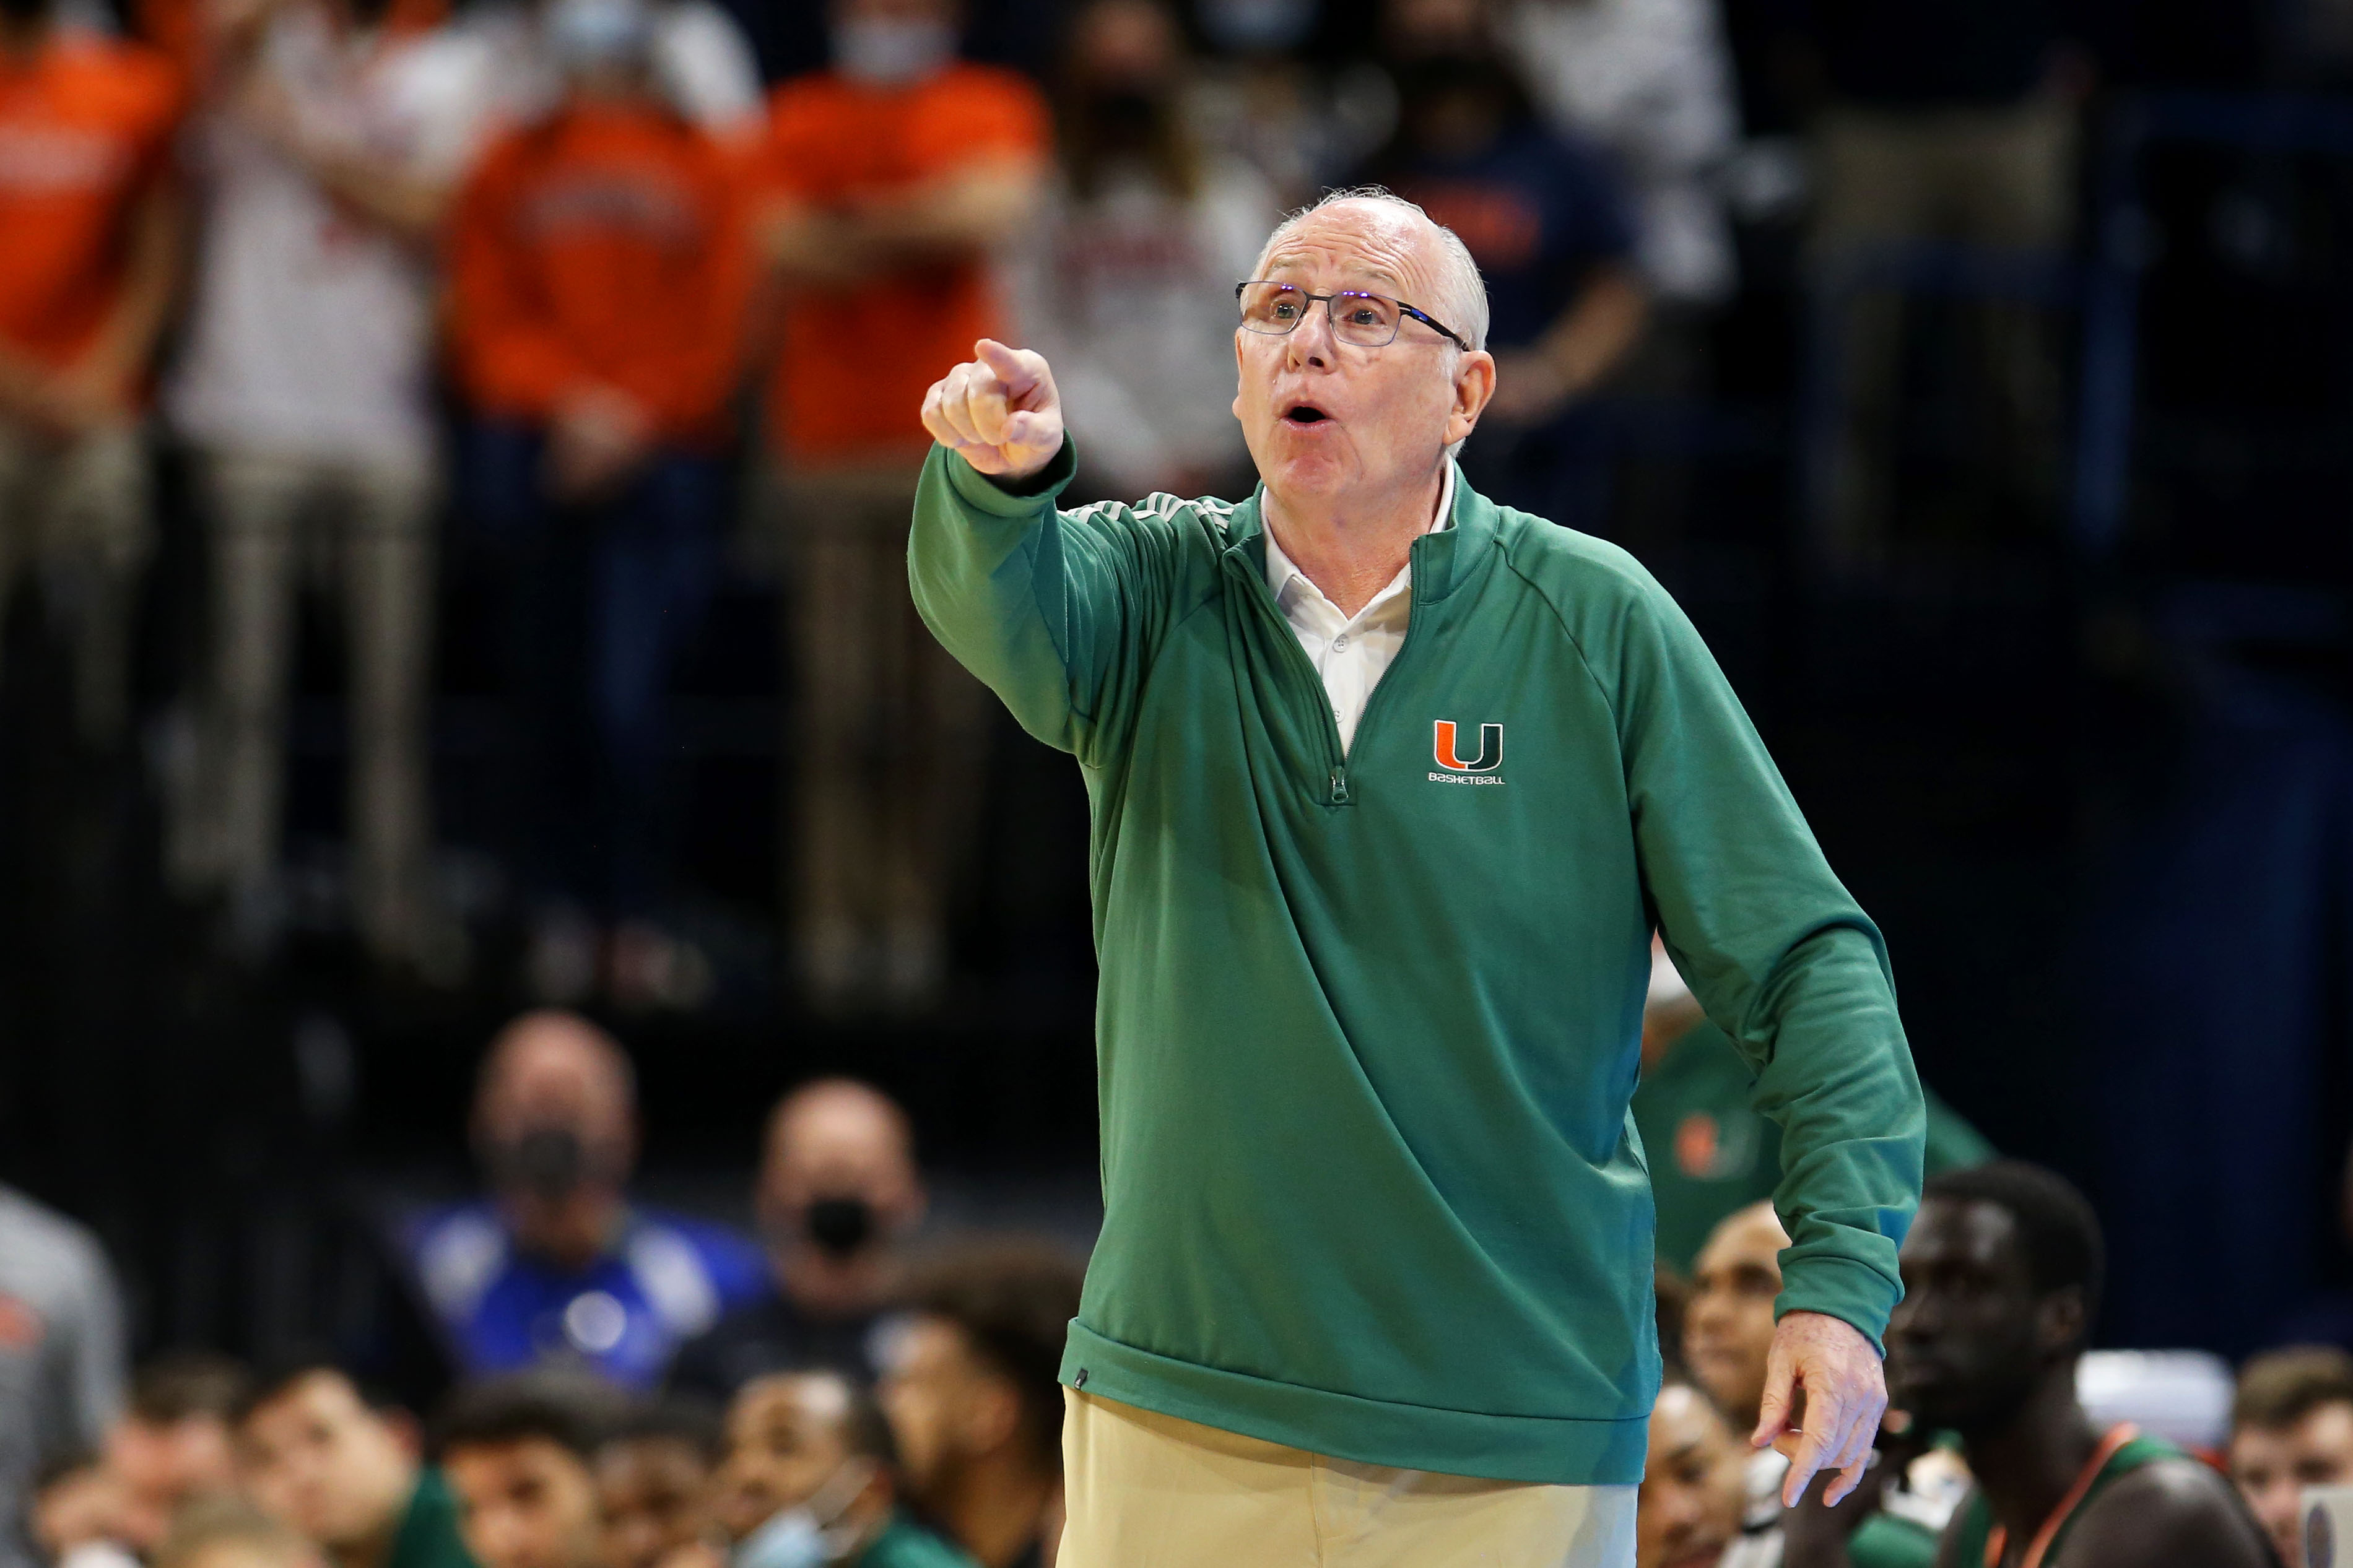 Canes hoops team drops 3 spots in latest AP poll